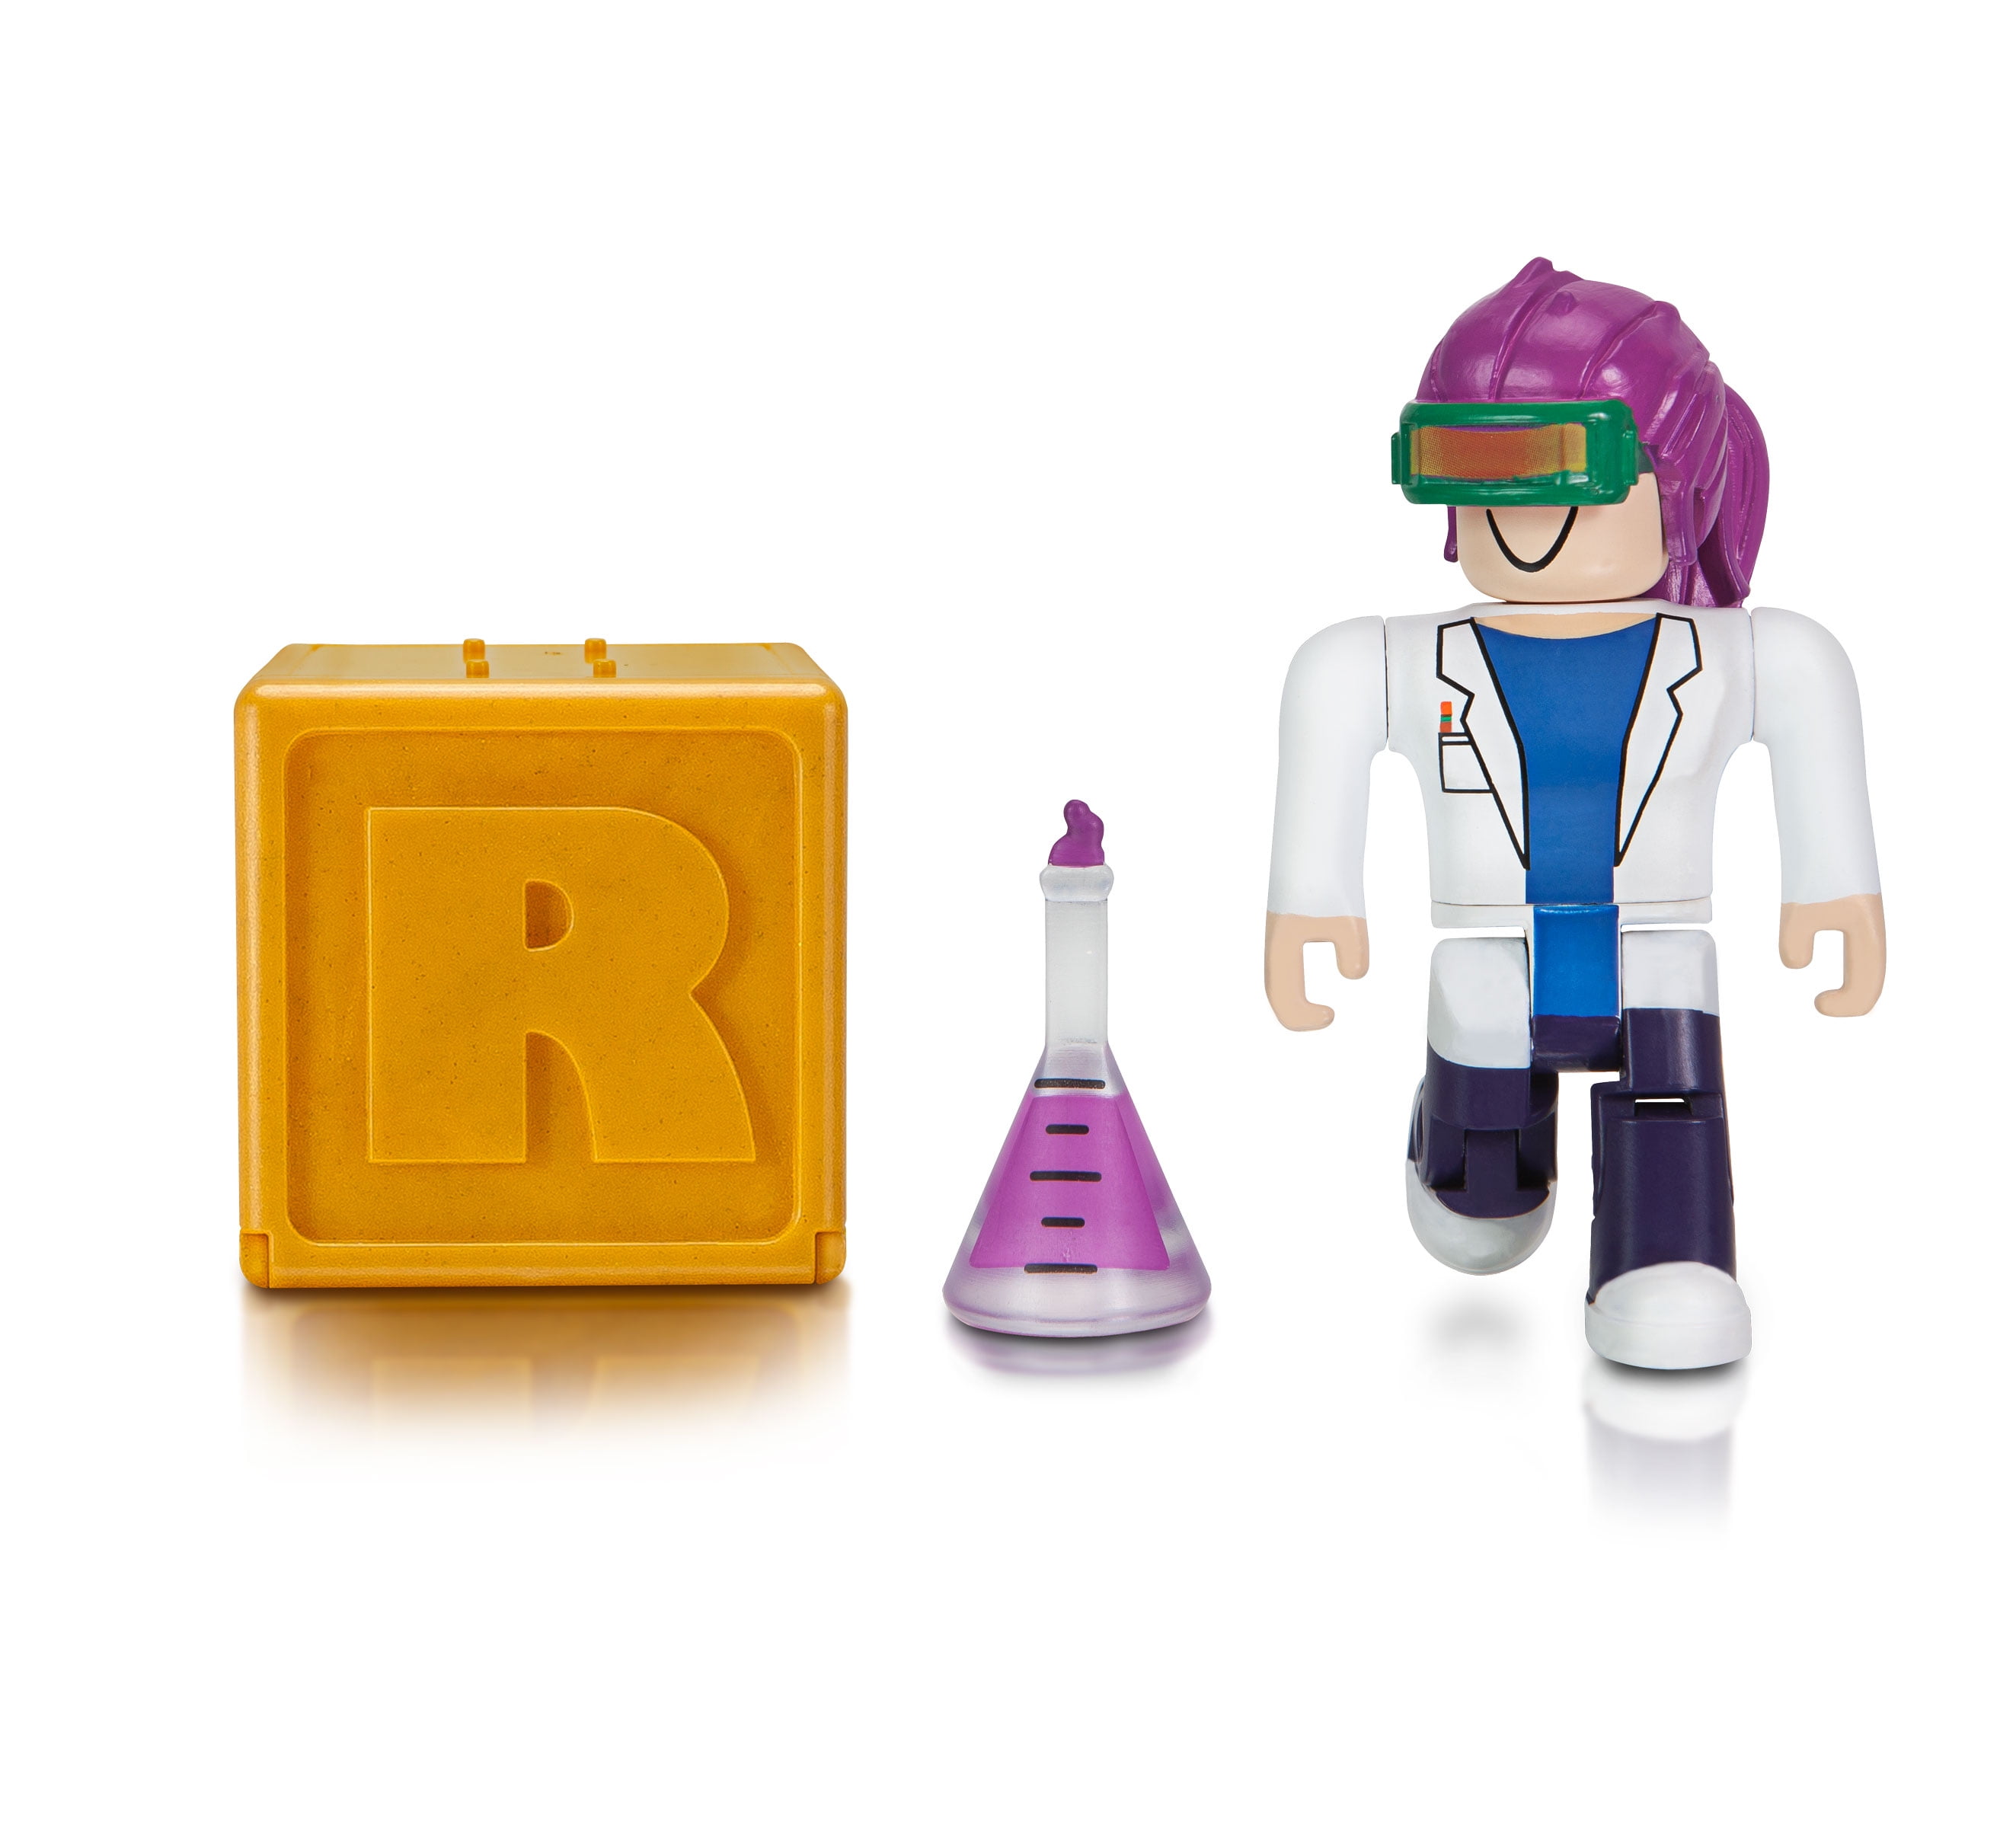 Roblox Celebrity Collection Series 1 Mystery Figure Includes 1 Figure Exclusive Virtual Item Walmart Com Walmart Com - roblox action collection series 3 mystery figure includes 1 figure exclusive virtual item walmart com walmart com